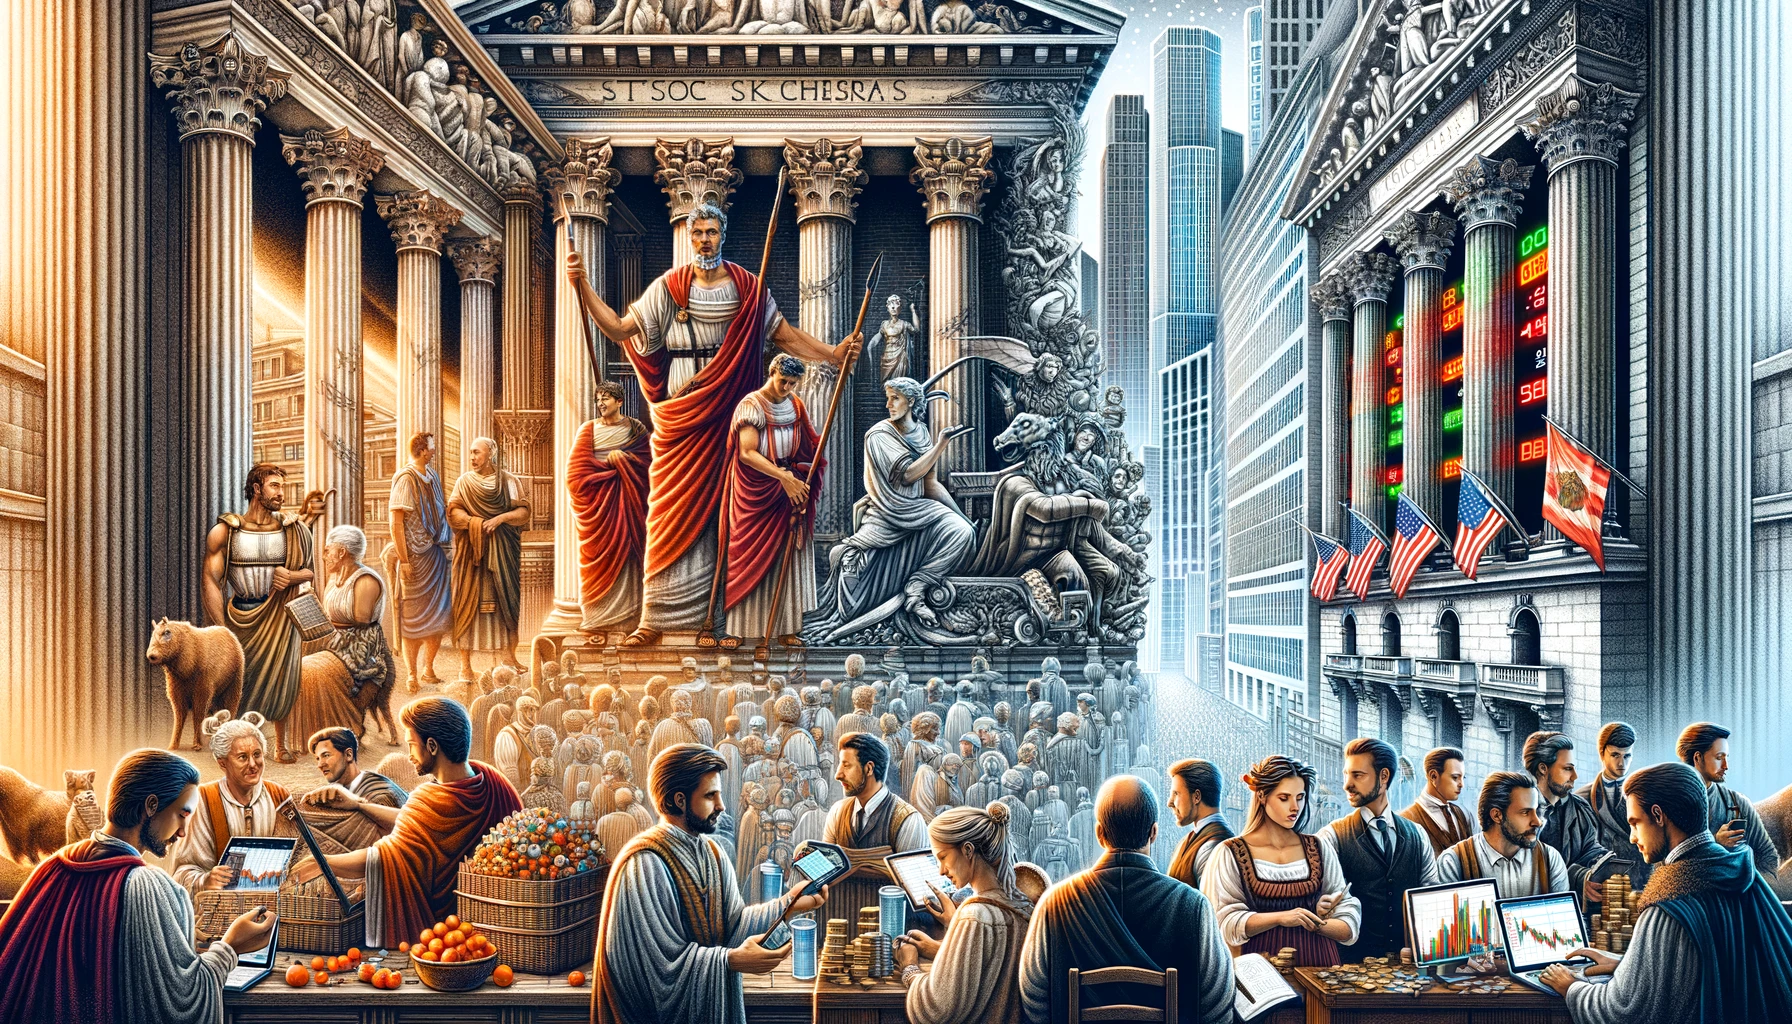 The history of stock markets: from ancient Rome to Wall Street